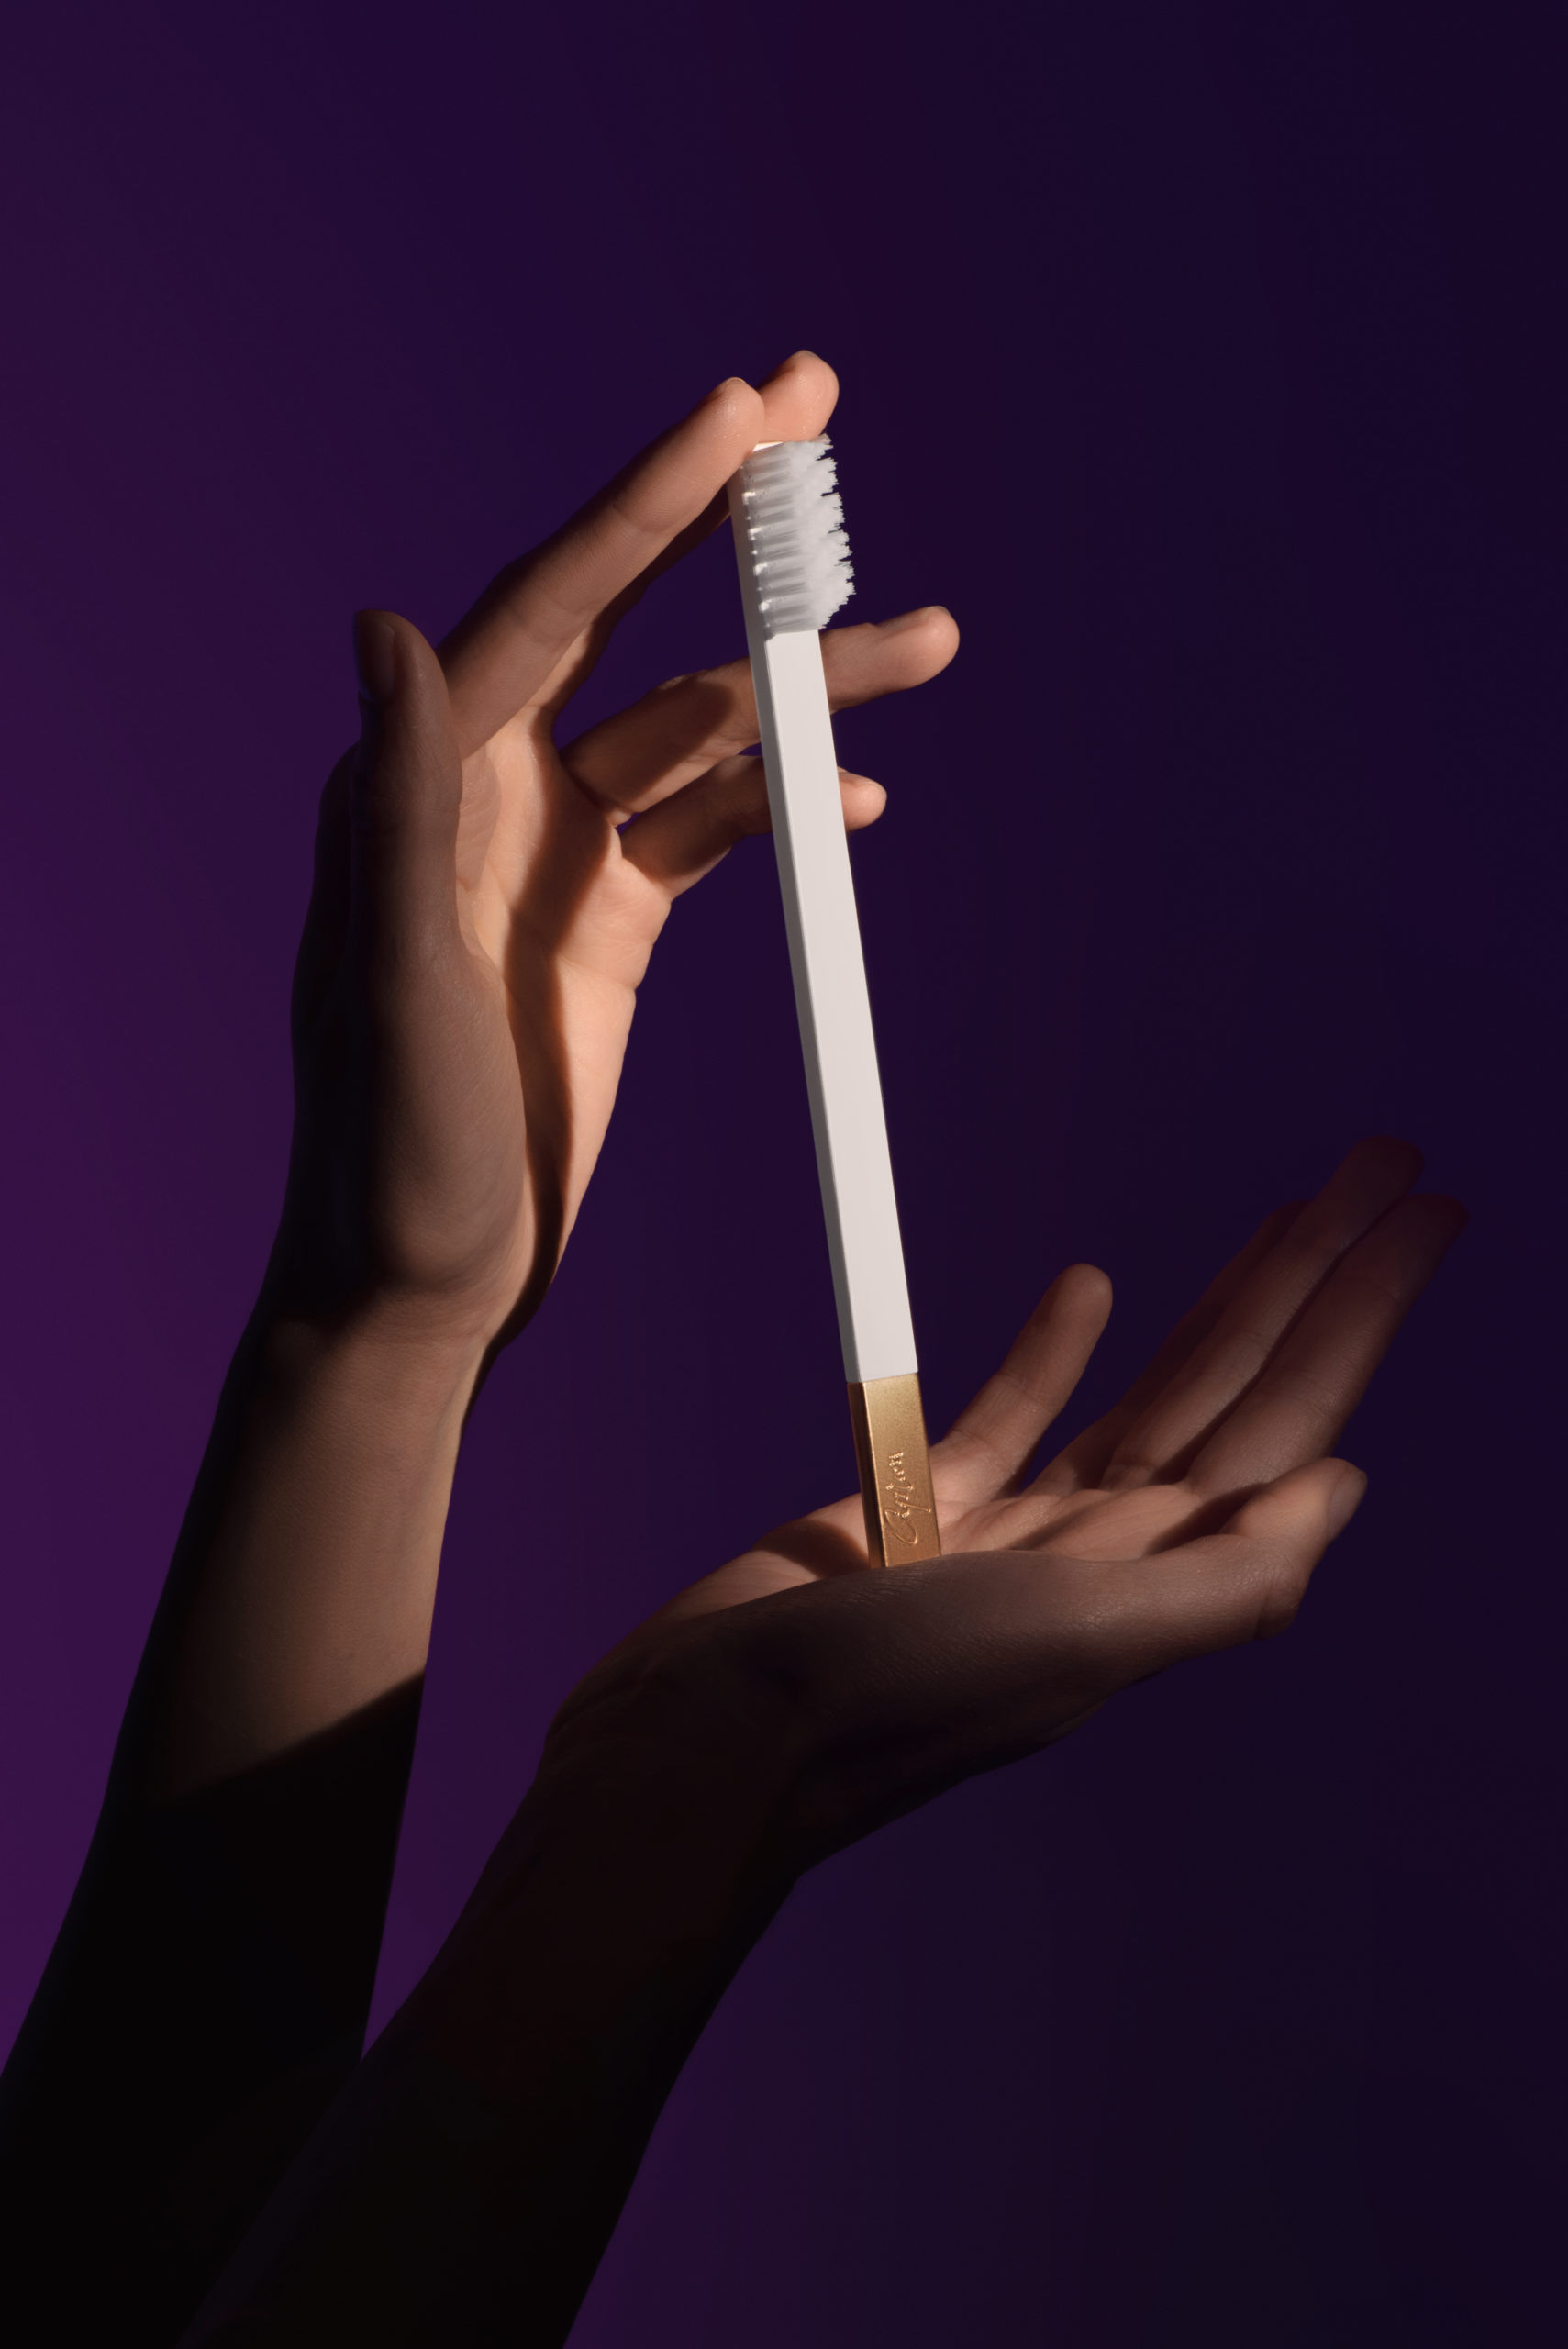 SLIM by Apriori toothbrush in white